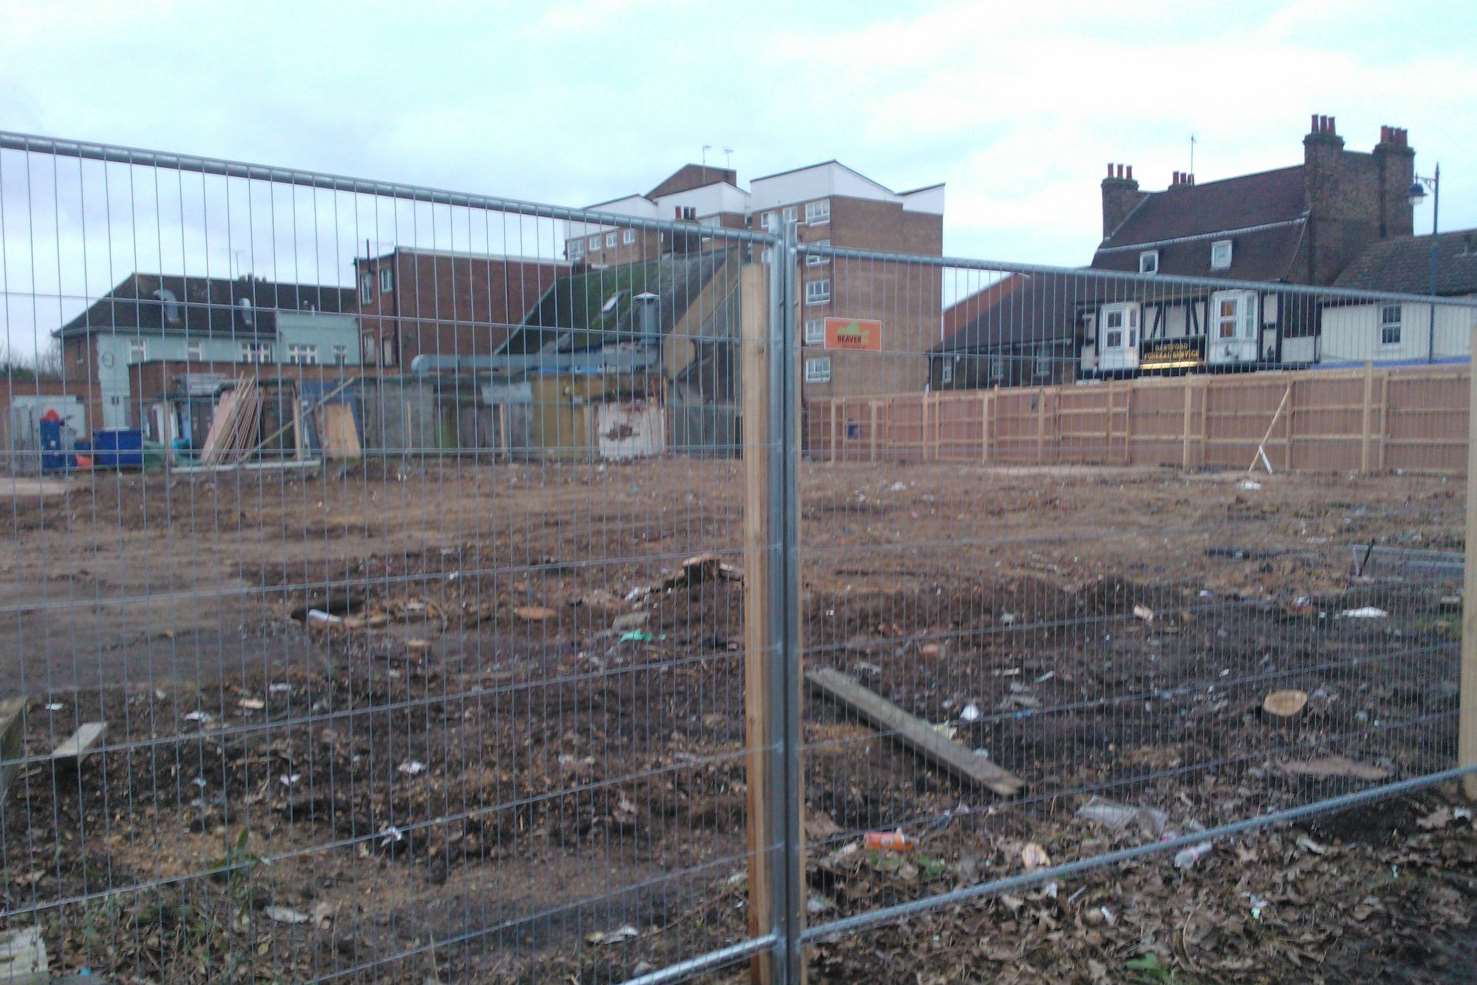 How the Lowfield Street site looks now